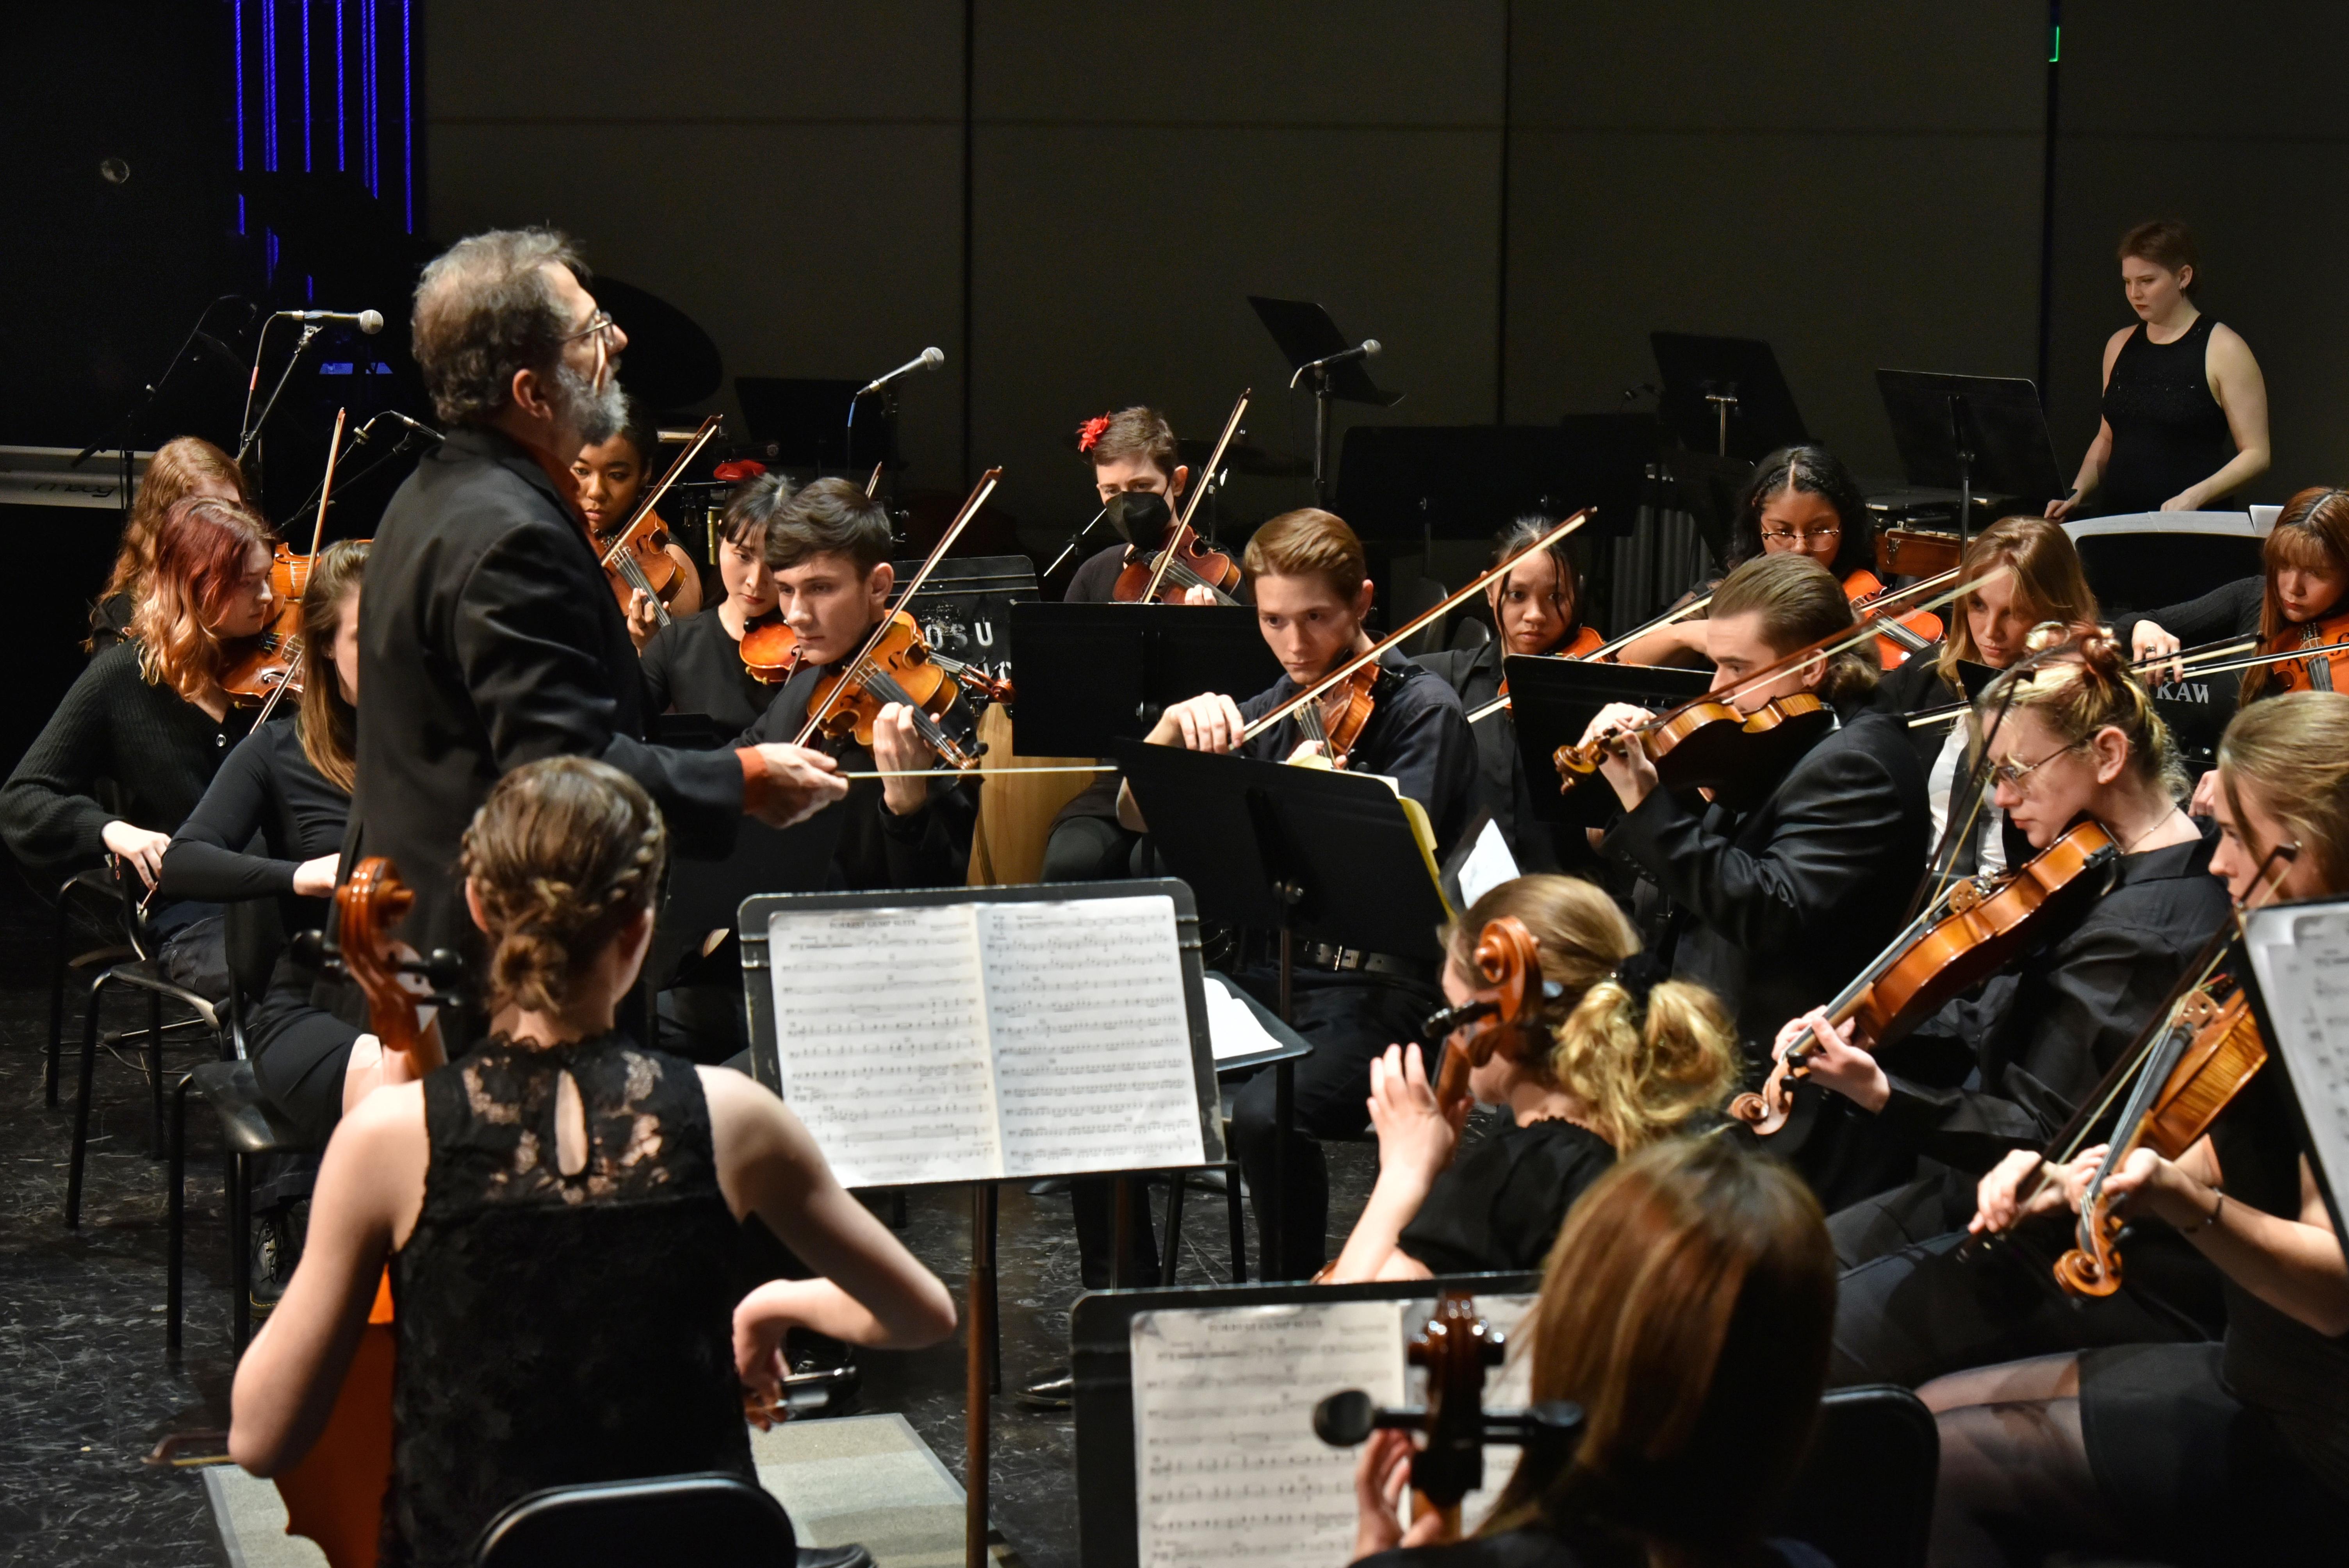 SUNY Oswego’s Music Department will offer a fast-moving fundraising show featuring a variety of ensembles and genres with its annual “Collage” concert, starting at 7:30 p.m. on Friday, March 1, in Tyler Hall’s Waterman Theatre.